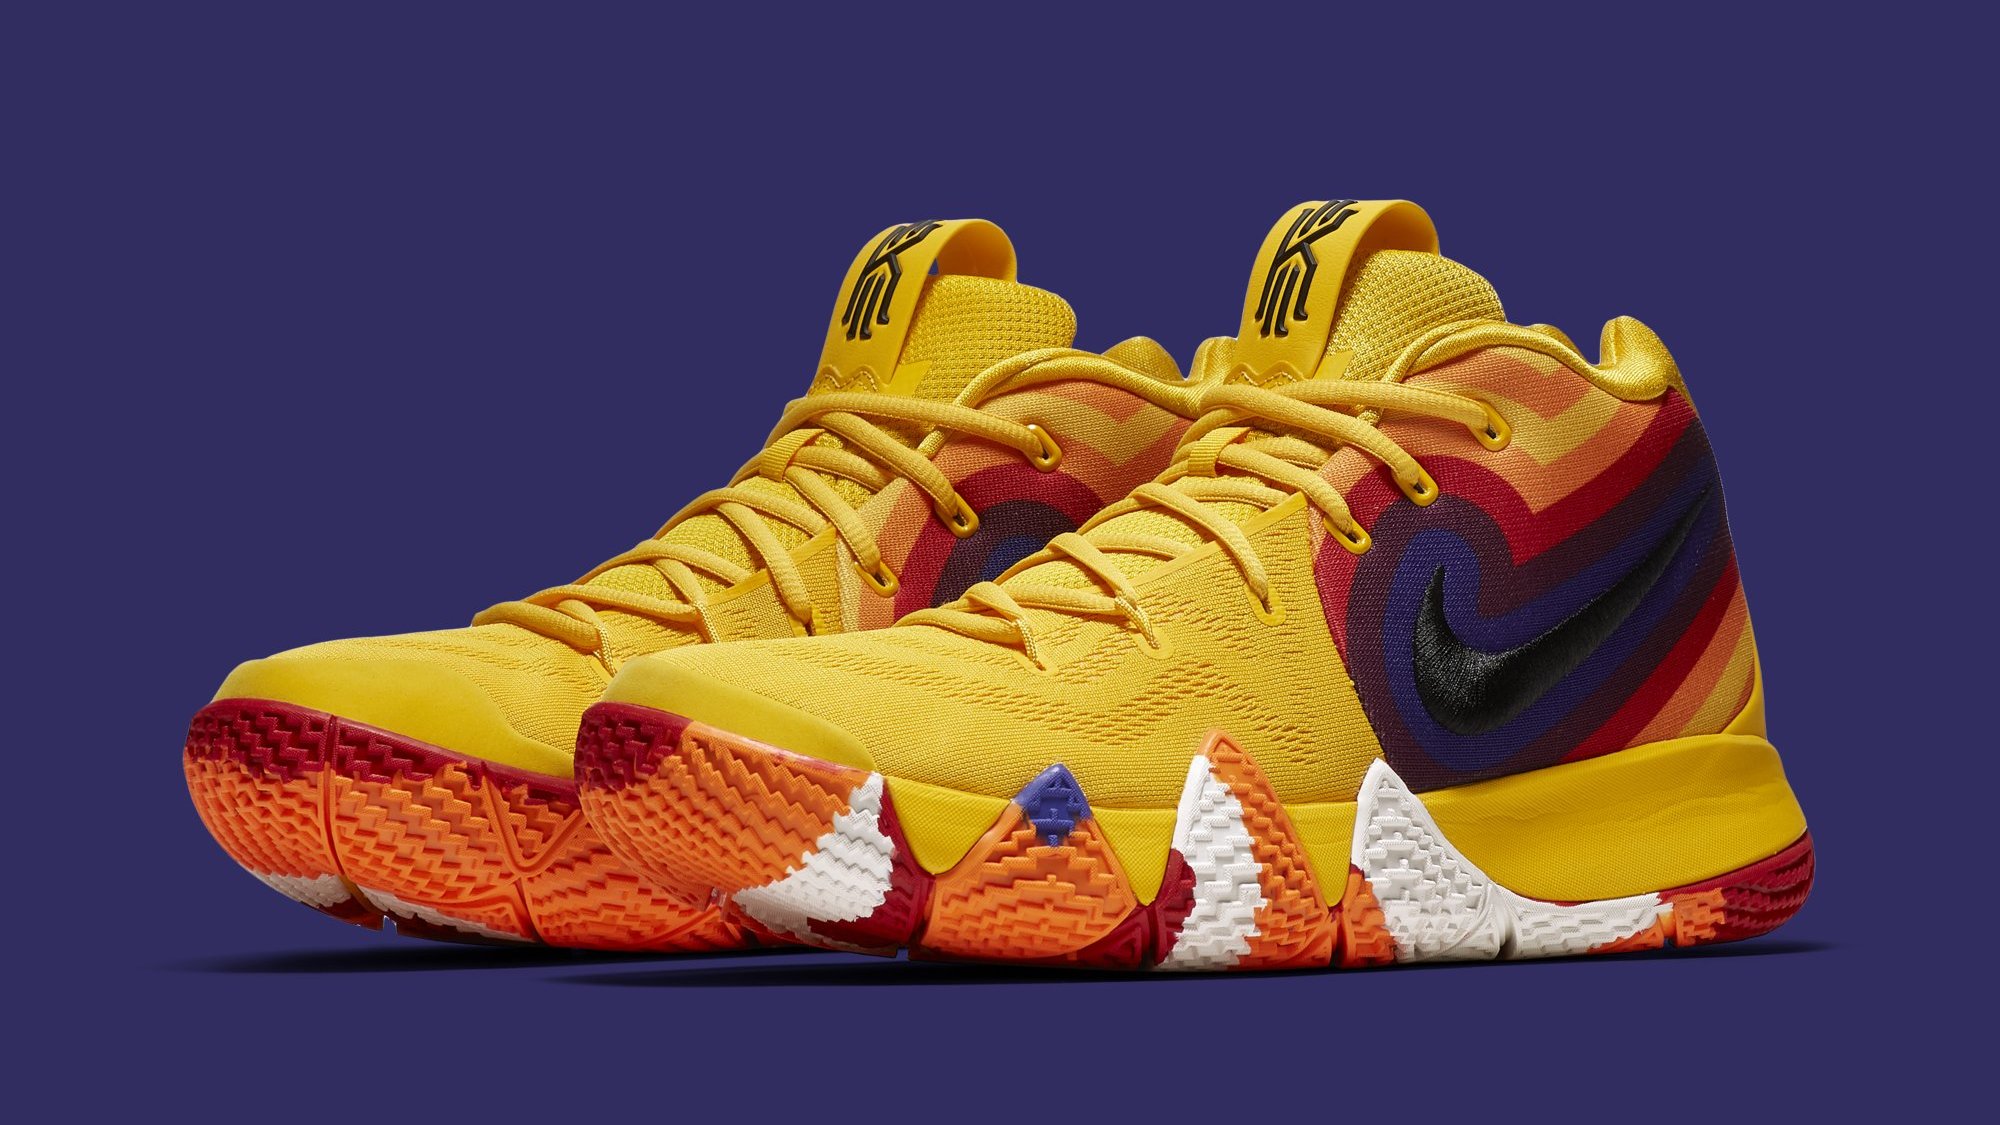 kyrie 4 yellow multicolor